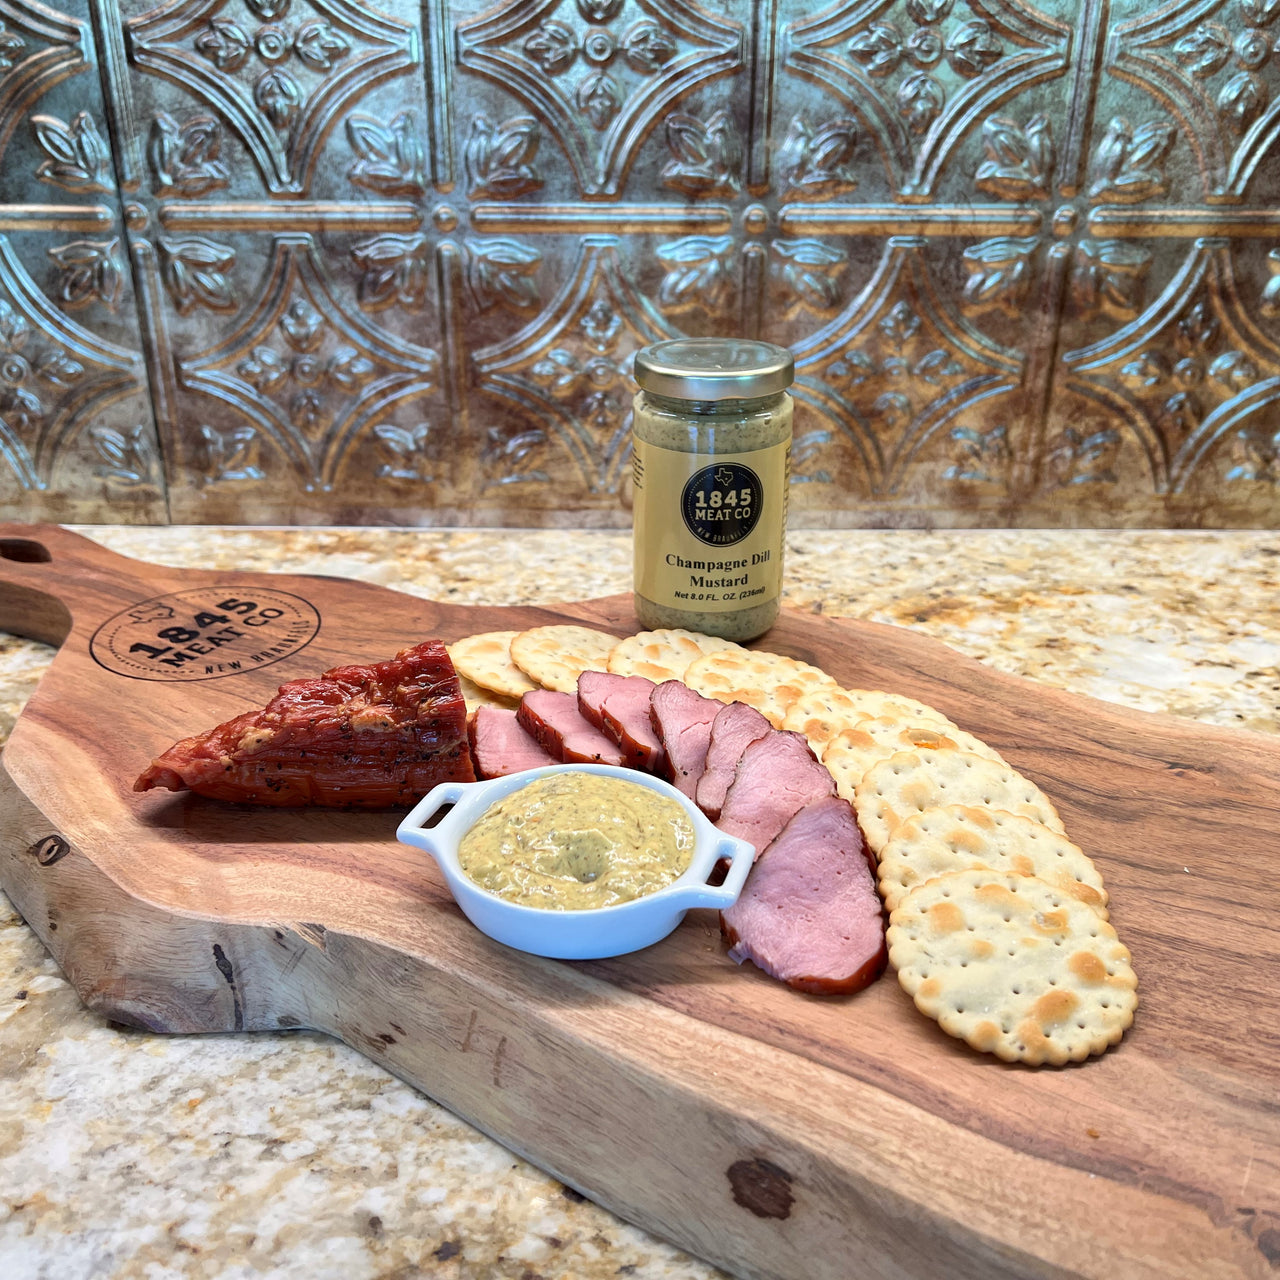 ﻿This mustard is a great addition to a meat board, sandwich or snack!  Just a hint of dill and sweetness from the champagne.